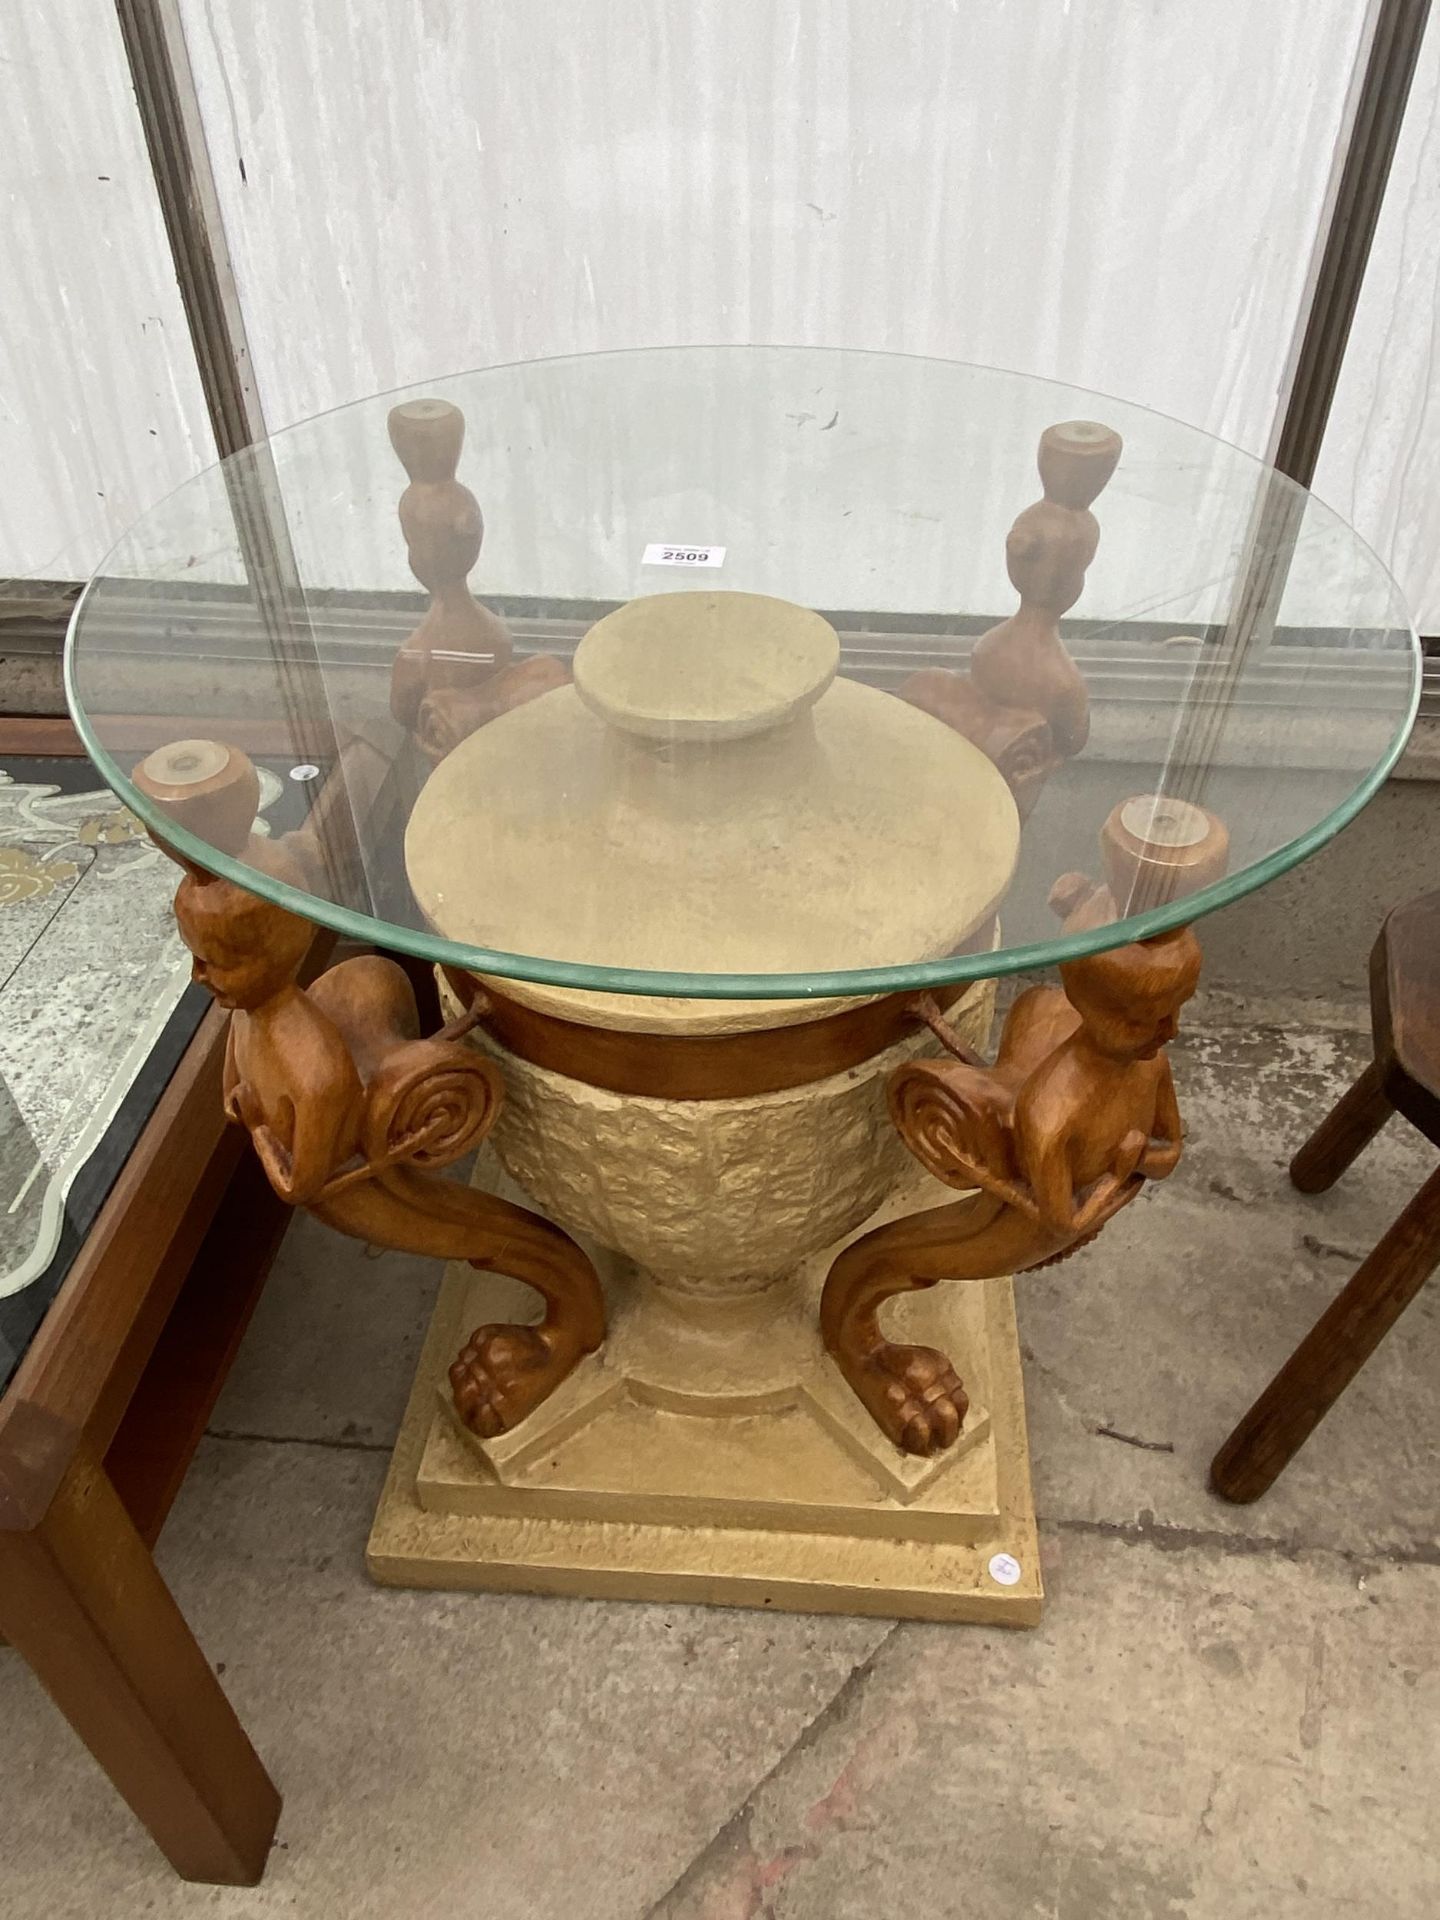 A RESIN LAMP TABLE ON URN SHAPED BASE SUPPORTED BY MYTHICAL FIGURES WITH GLASS TOP, 23.5" DIAMETER